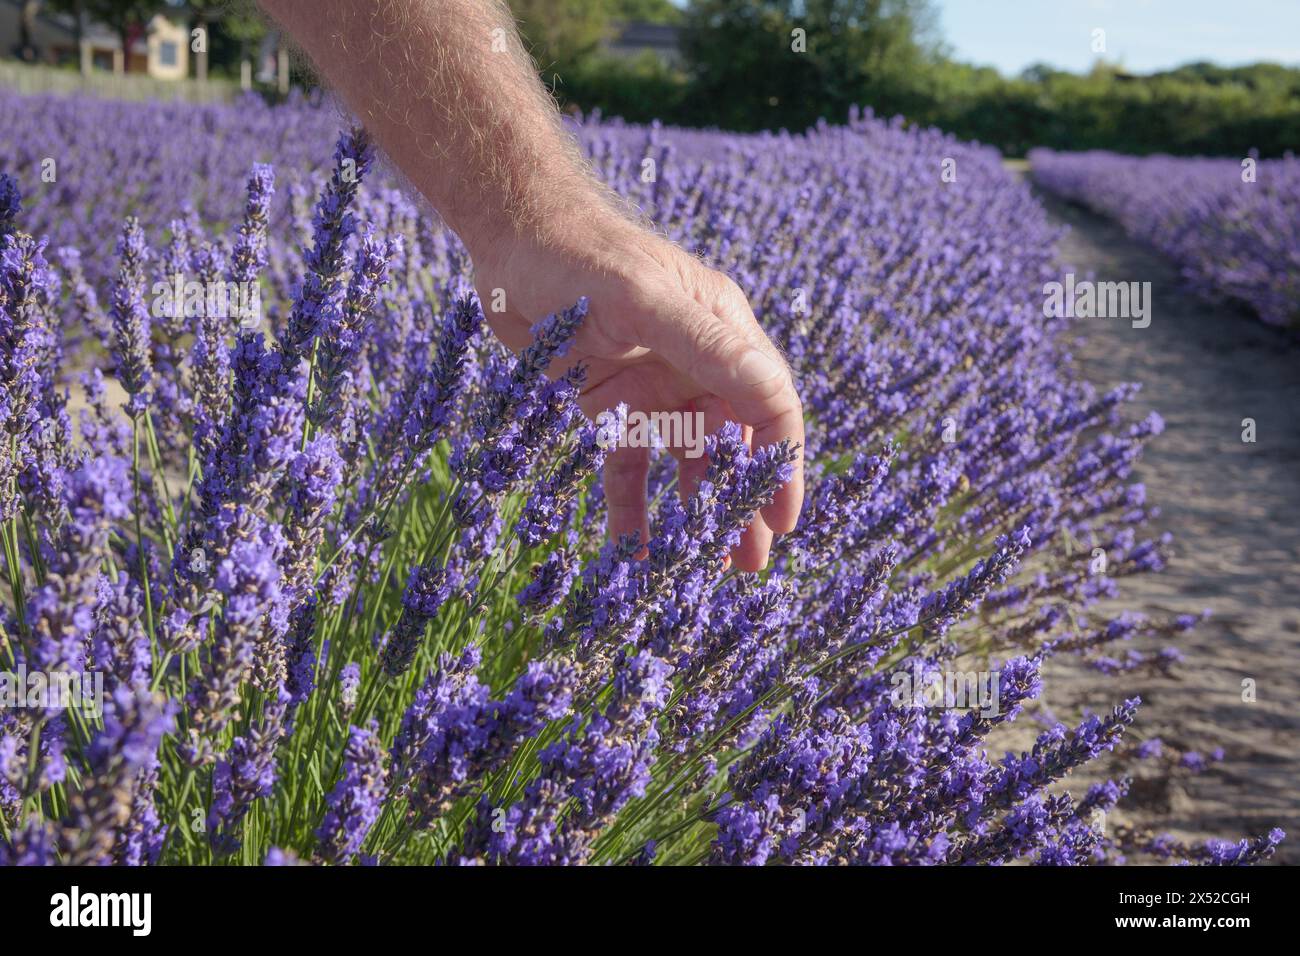 Lavender aromatic field. The male hand touching blooming purple fresh plants in sunny day close up. Blue sky landscape natural background. Stock Photo